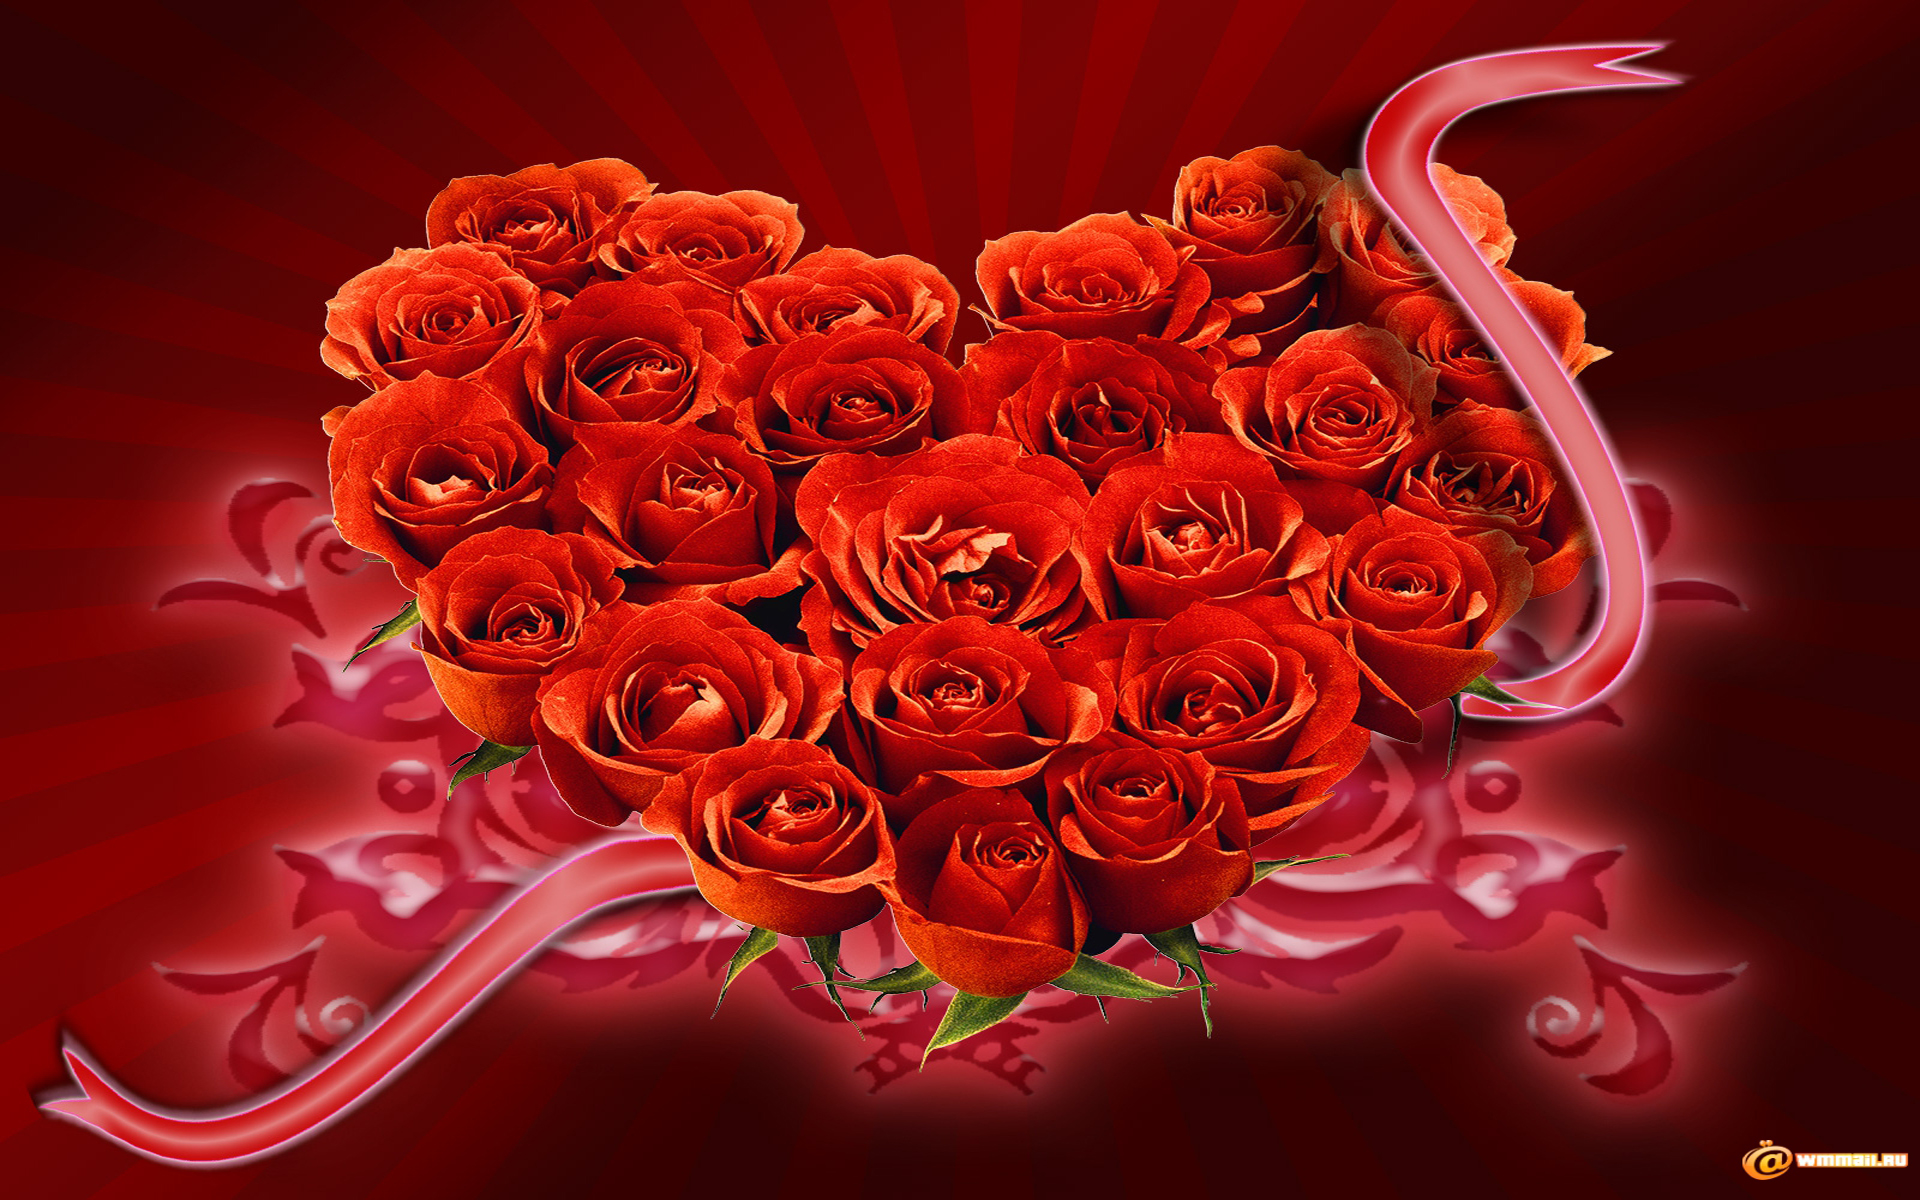 rose and heart wallpaper,red,heart,rose,garden roses,valentine's day